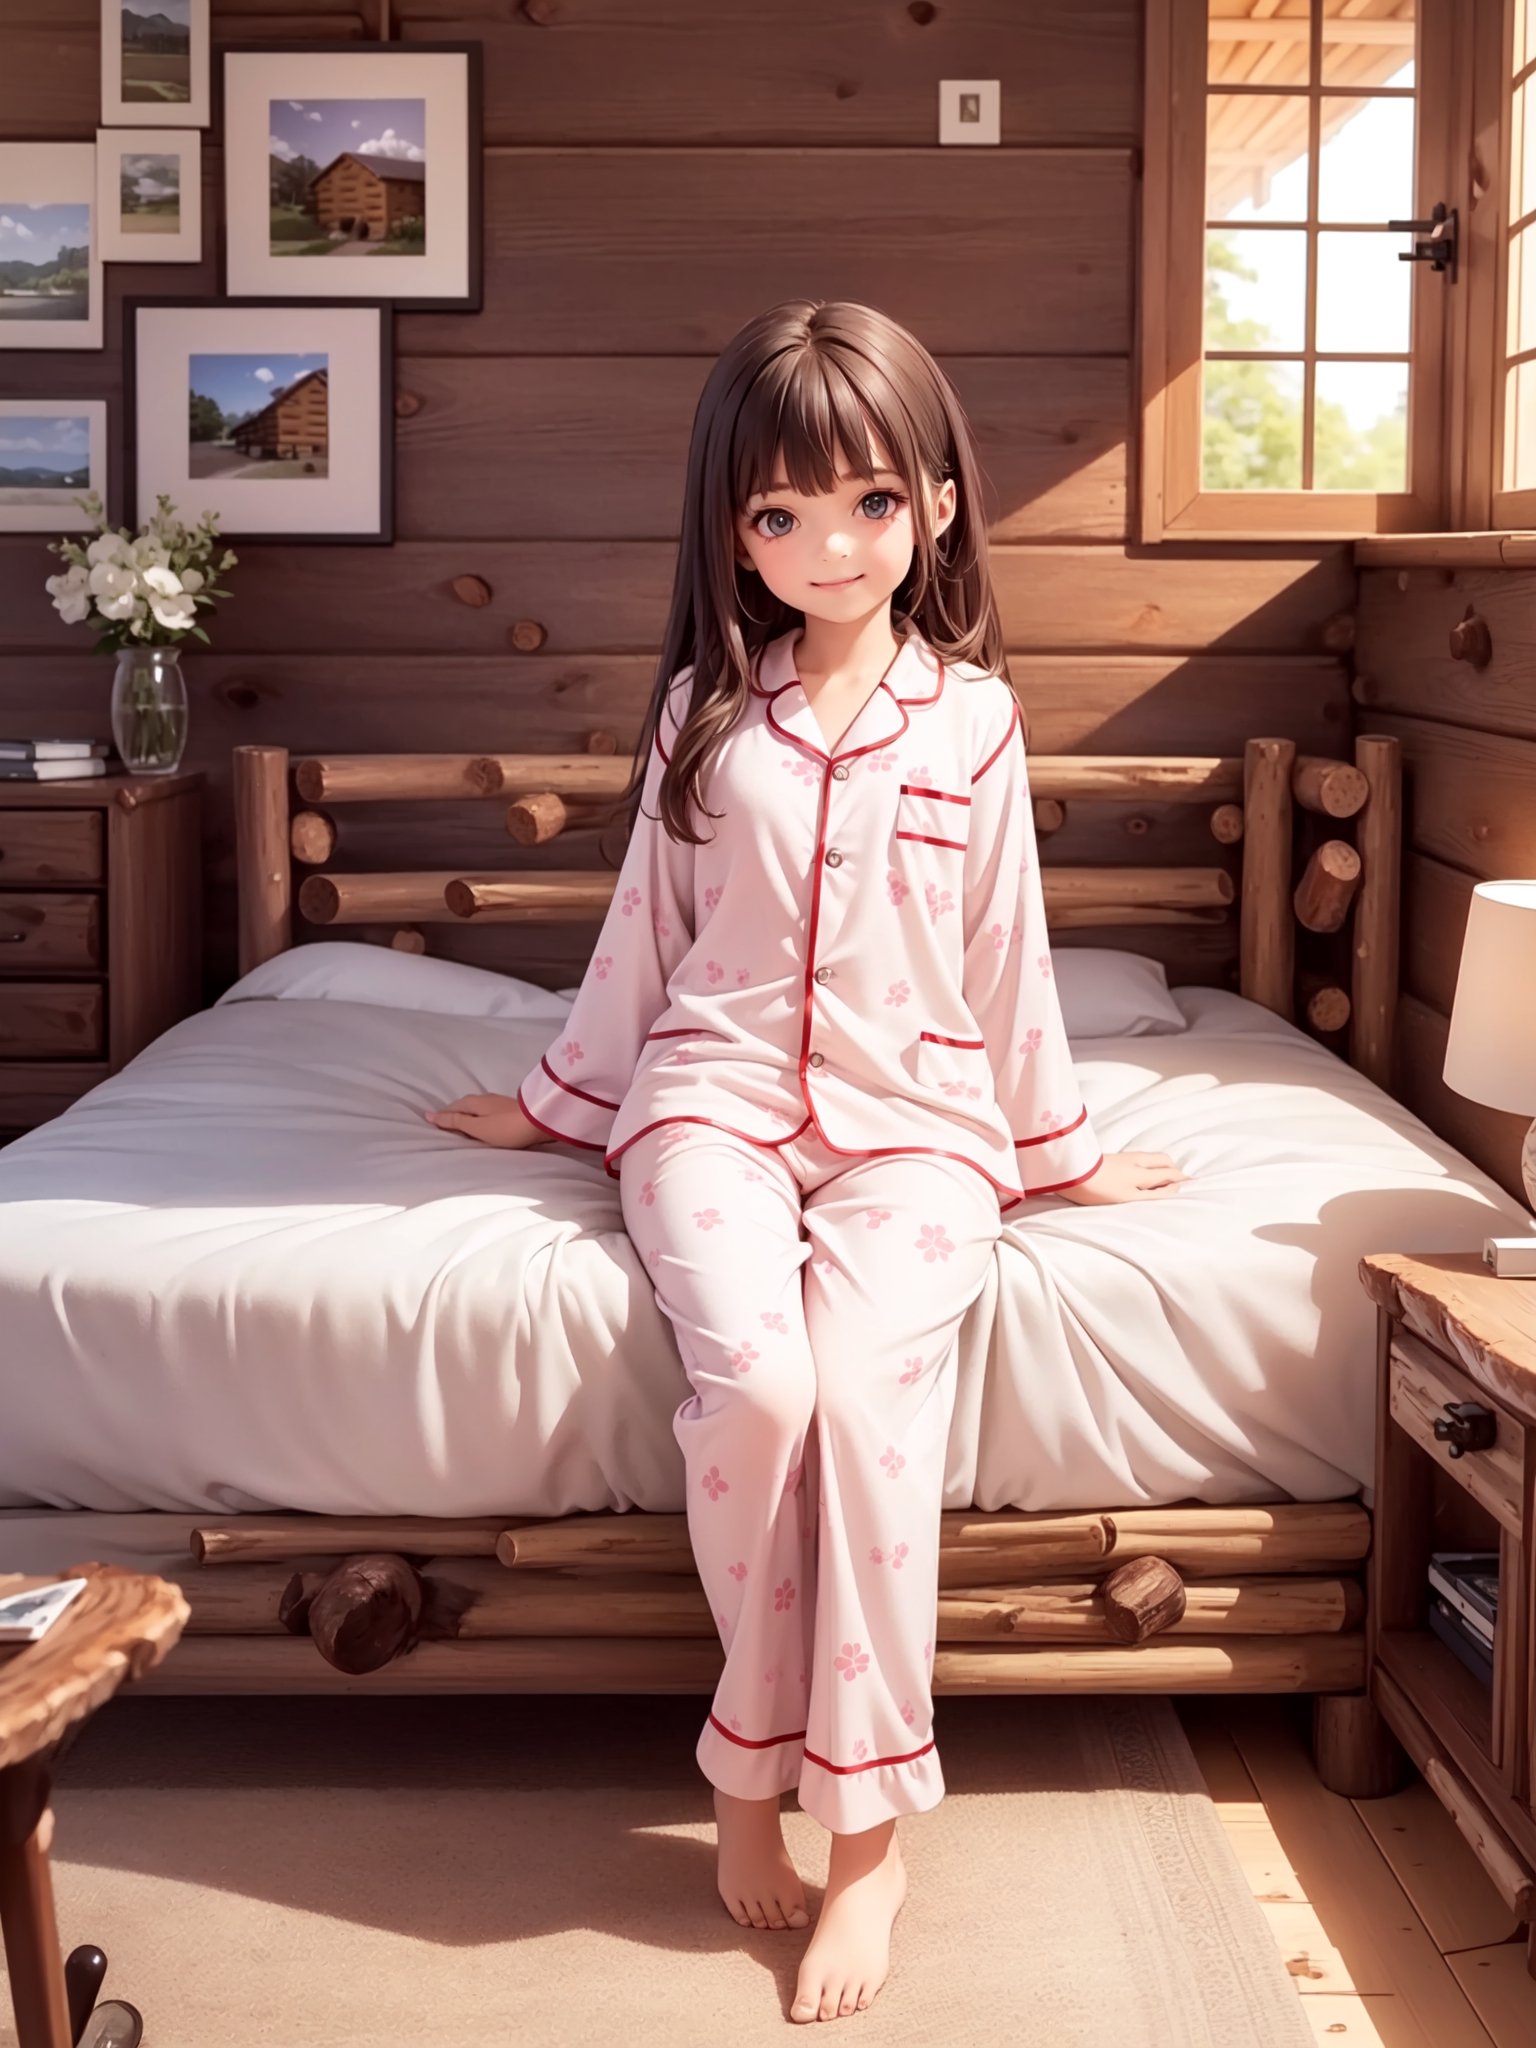 ((6 year old girl: 1.5)), 1 girl, loli, petite girl, complete anatomy, whole body, child's body, child, super cute, girl, little girl, beautiful girl, beautiful shining body, bangs, brown hair, back high eyes, (aquamarine eyes), droopy eyes, petite, tall eyes, beautiful girl with beautiful details, beautiful delicate eyes, detailed face, beautiful eyes, beautiful shining body, smile, happiness, full body angle, old days House in the American West,  Inside the Room,  Fireplace,
((Realism: 1.2)), Dynamic long shots, Cinematic lighting, Perfect composition, Highly detailed, Official art, Masterpiece by Sumic.mic, (Top quality: 1.3), Reflections, Highly detailed CG Unity 8k Wallpaper, Detailed Background, Masterpiece , Best Quality, (Masterpiece), (Best Quality: 1.4), (Ultra High Resolution: 1.2), (Hyper Realistic: 1.4), (Photorealistic: 1.1), Best quality, high quality, high resolution, detail emphasis,((Log house room: 1.4)),masterpiece,((pajama:1.4)), on the bed